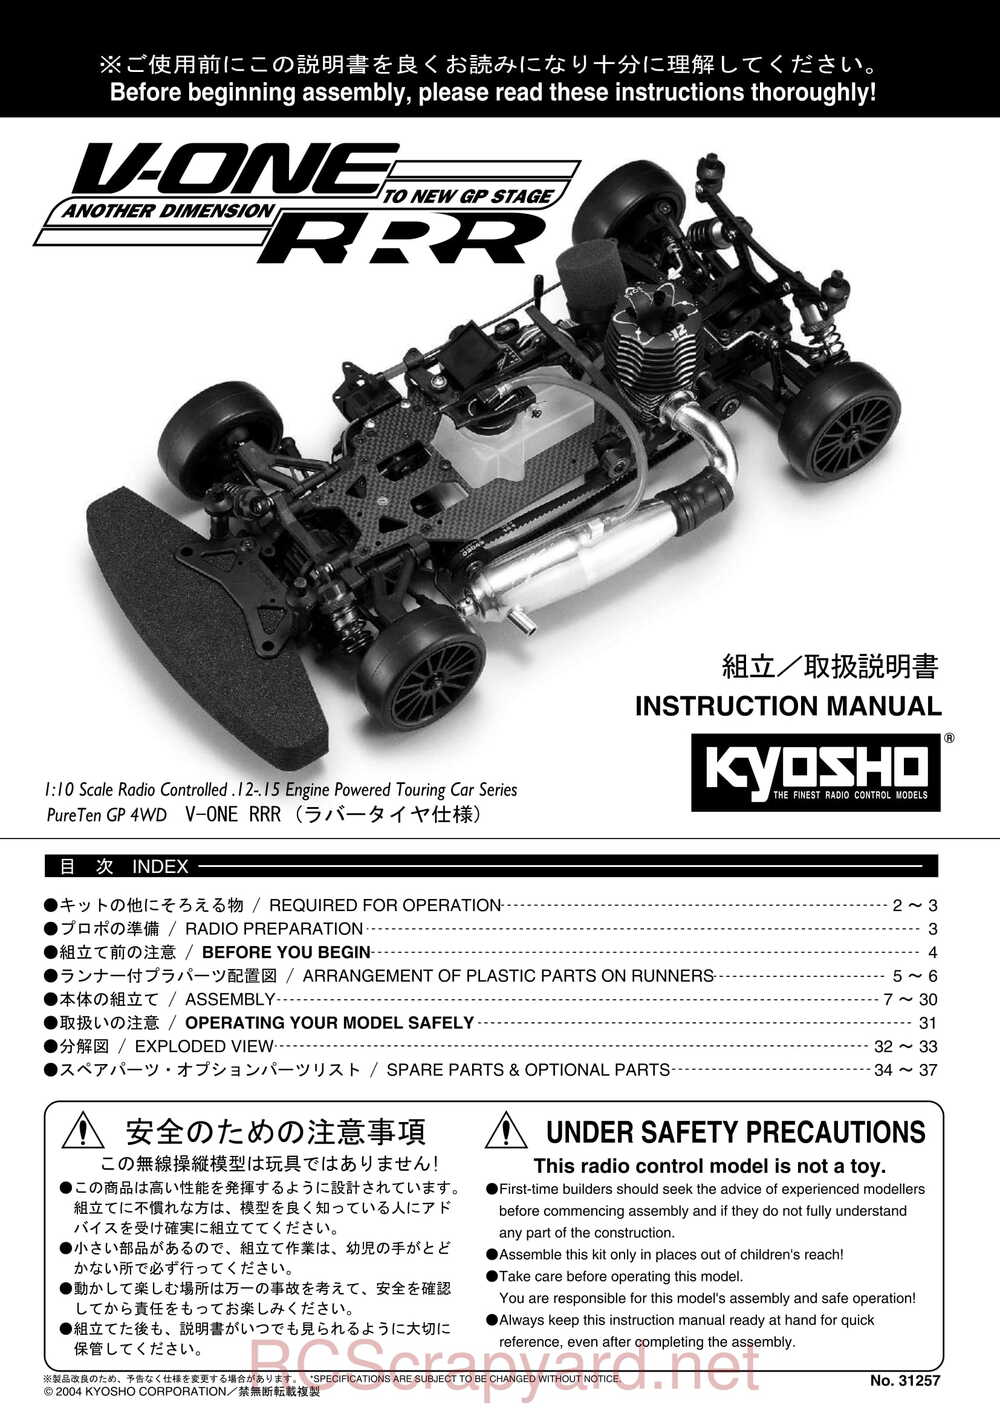 Kyosho - 31257 - V-One RRR Rubber - Manual - Page 01